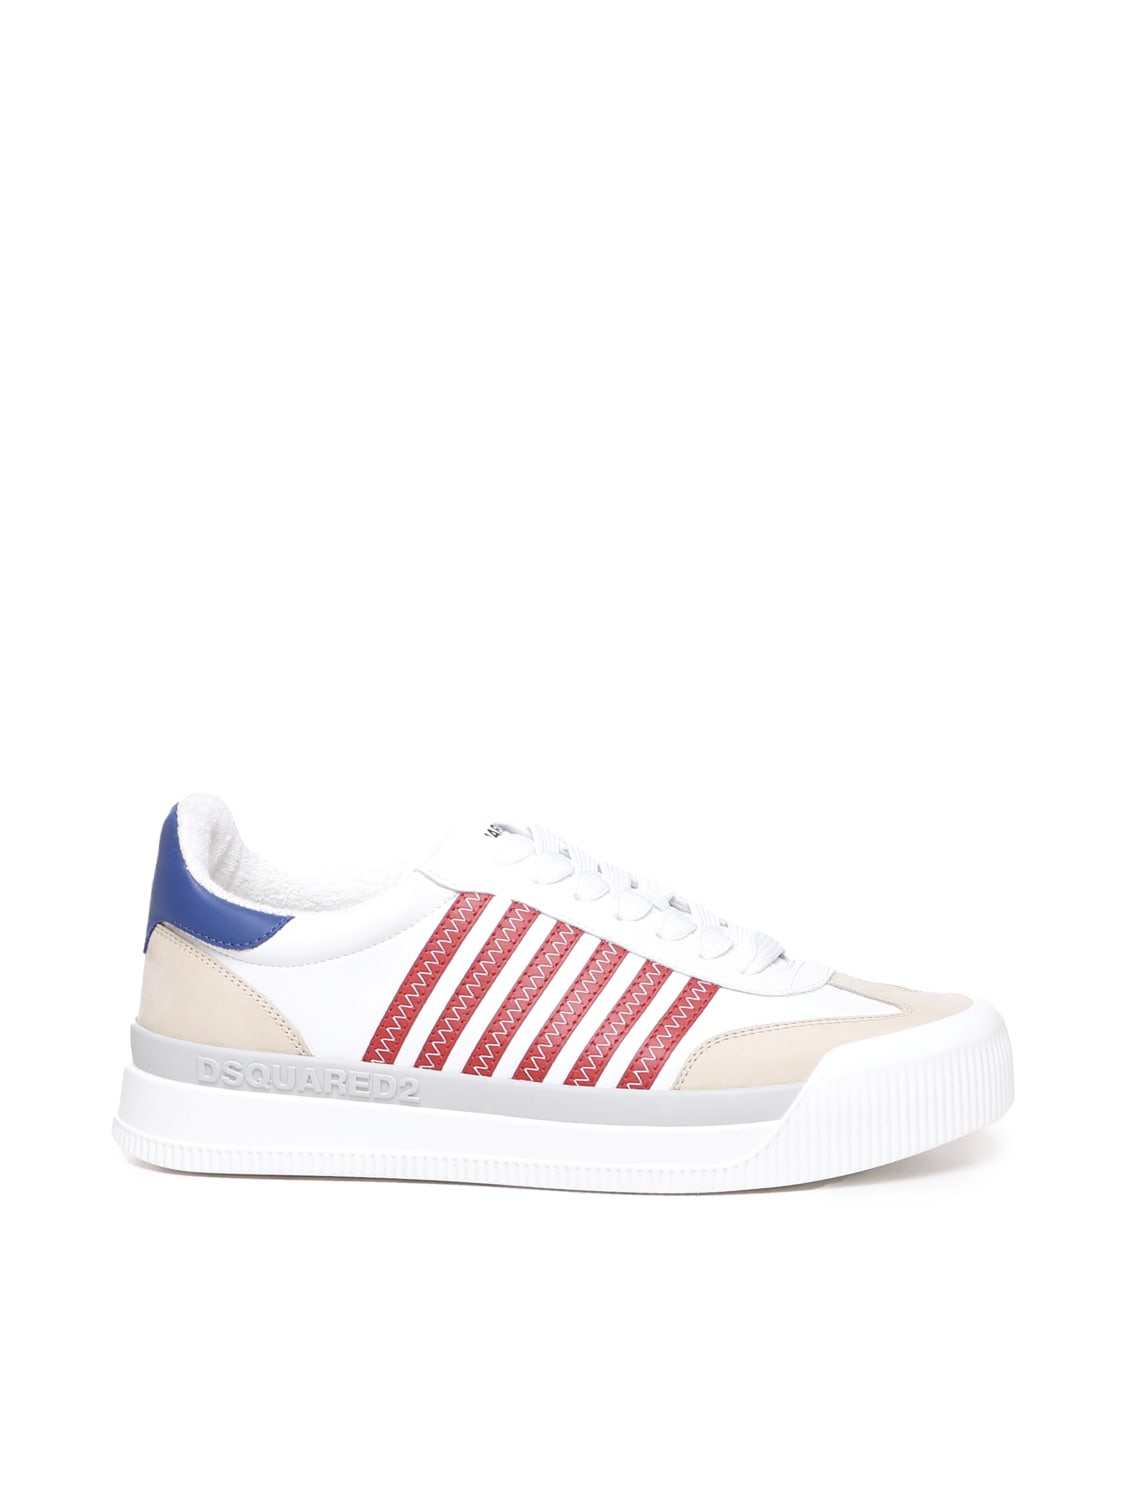 Dsquared2 Trainers In Calfskin In White, Red, Blue